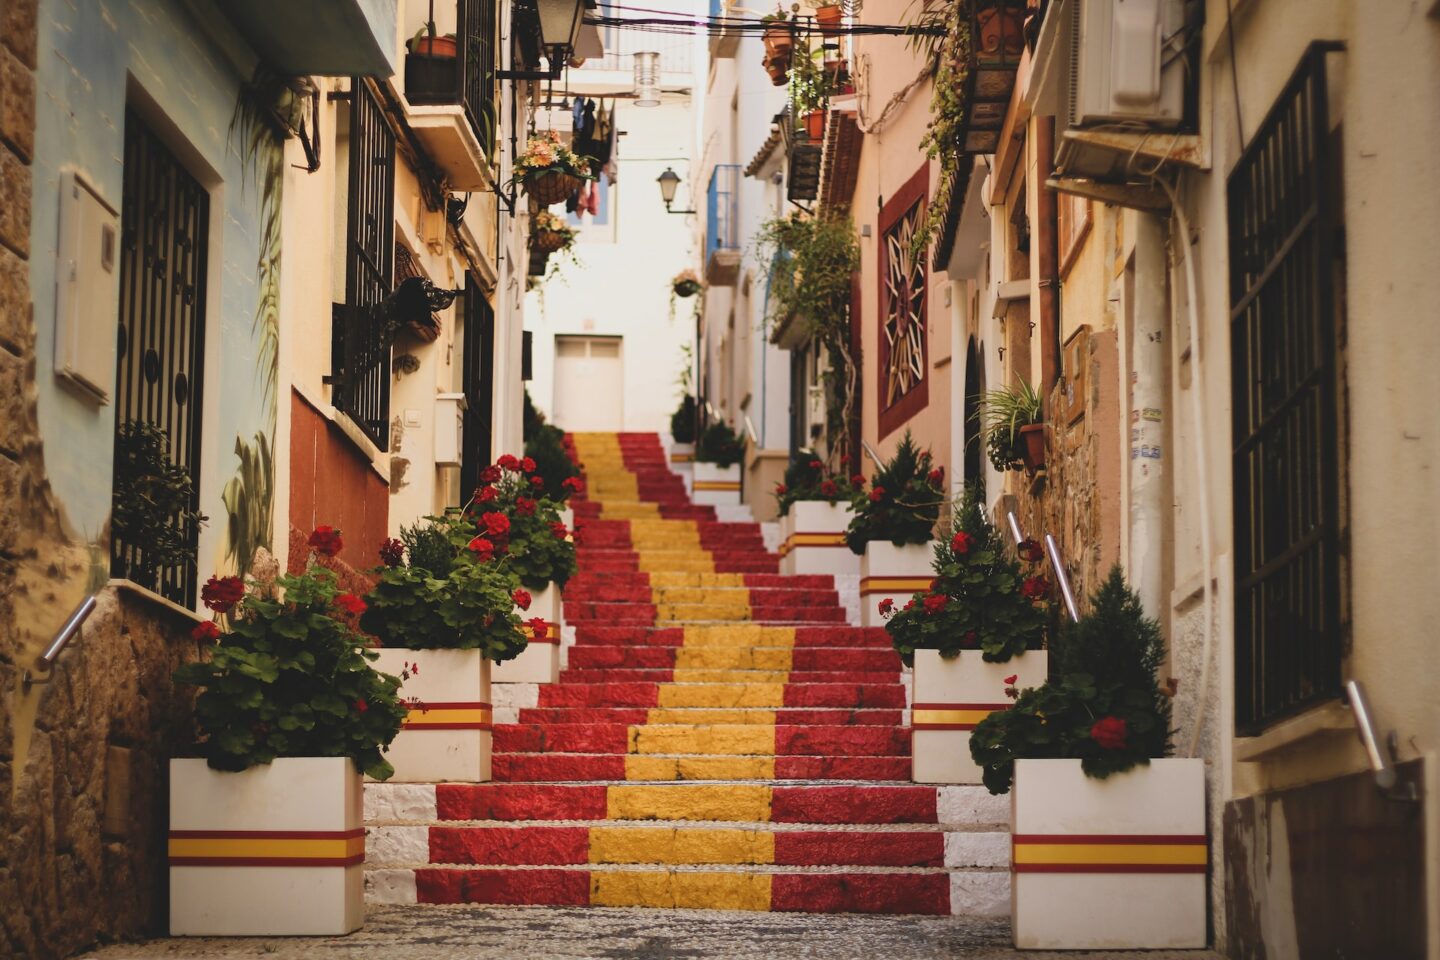 Images of stairway in Spain with Spanish flag painted on the stairs